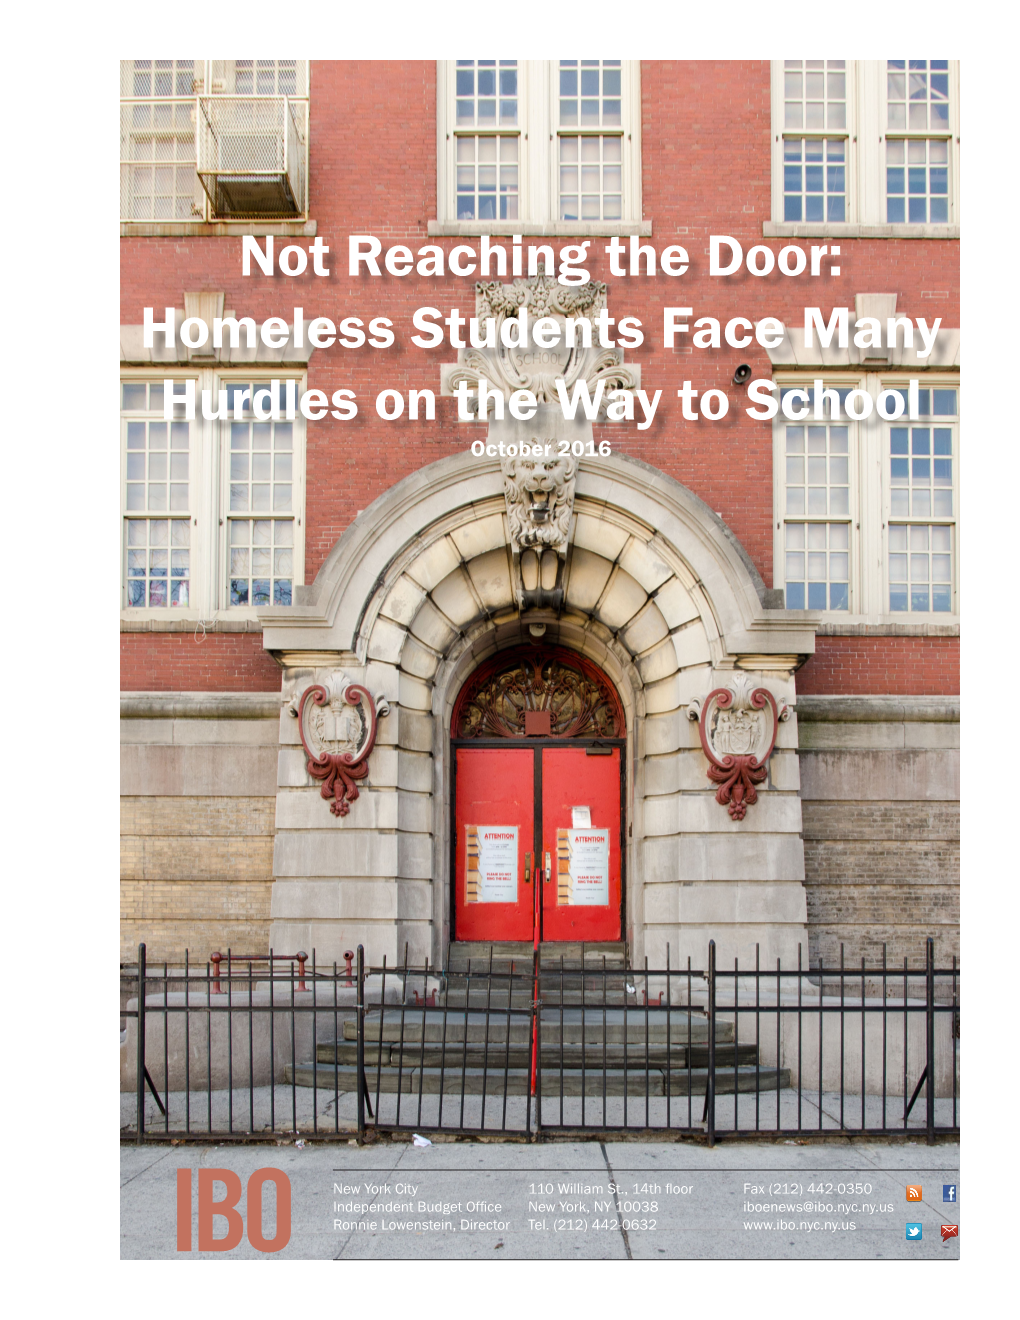 Homeless Students Face Many Hurdles on the Way to School October 2016